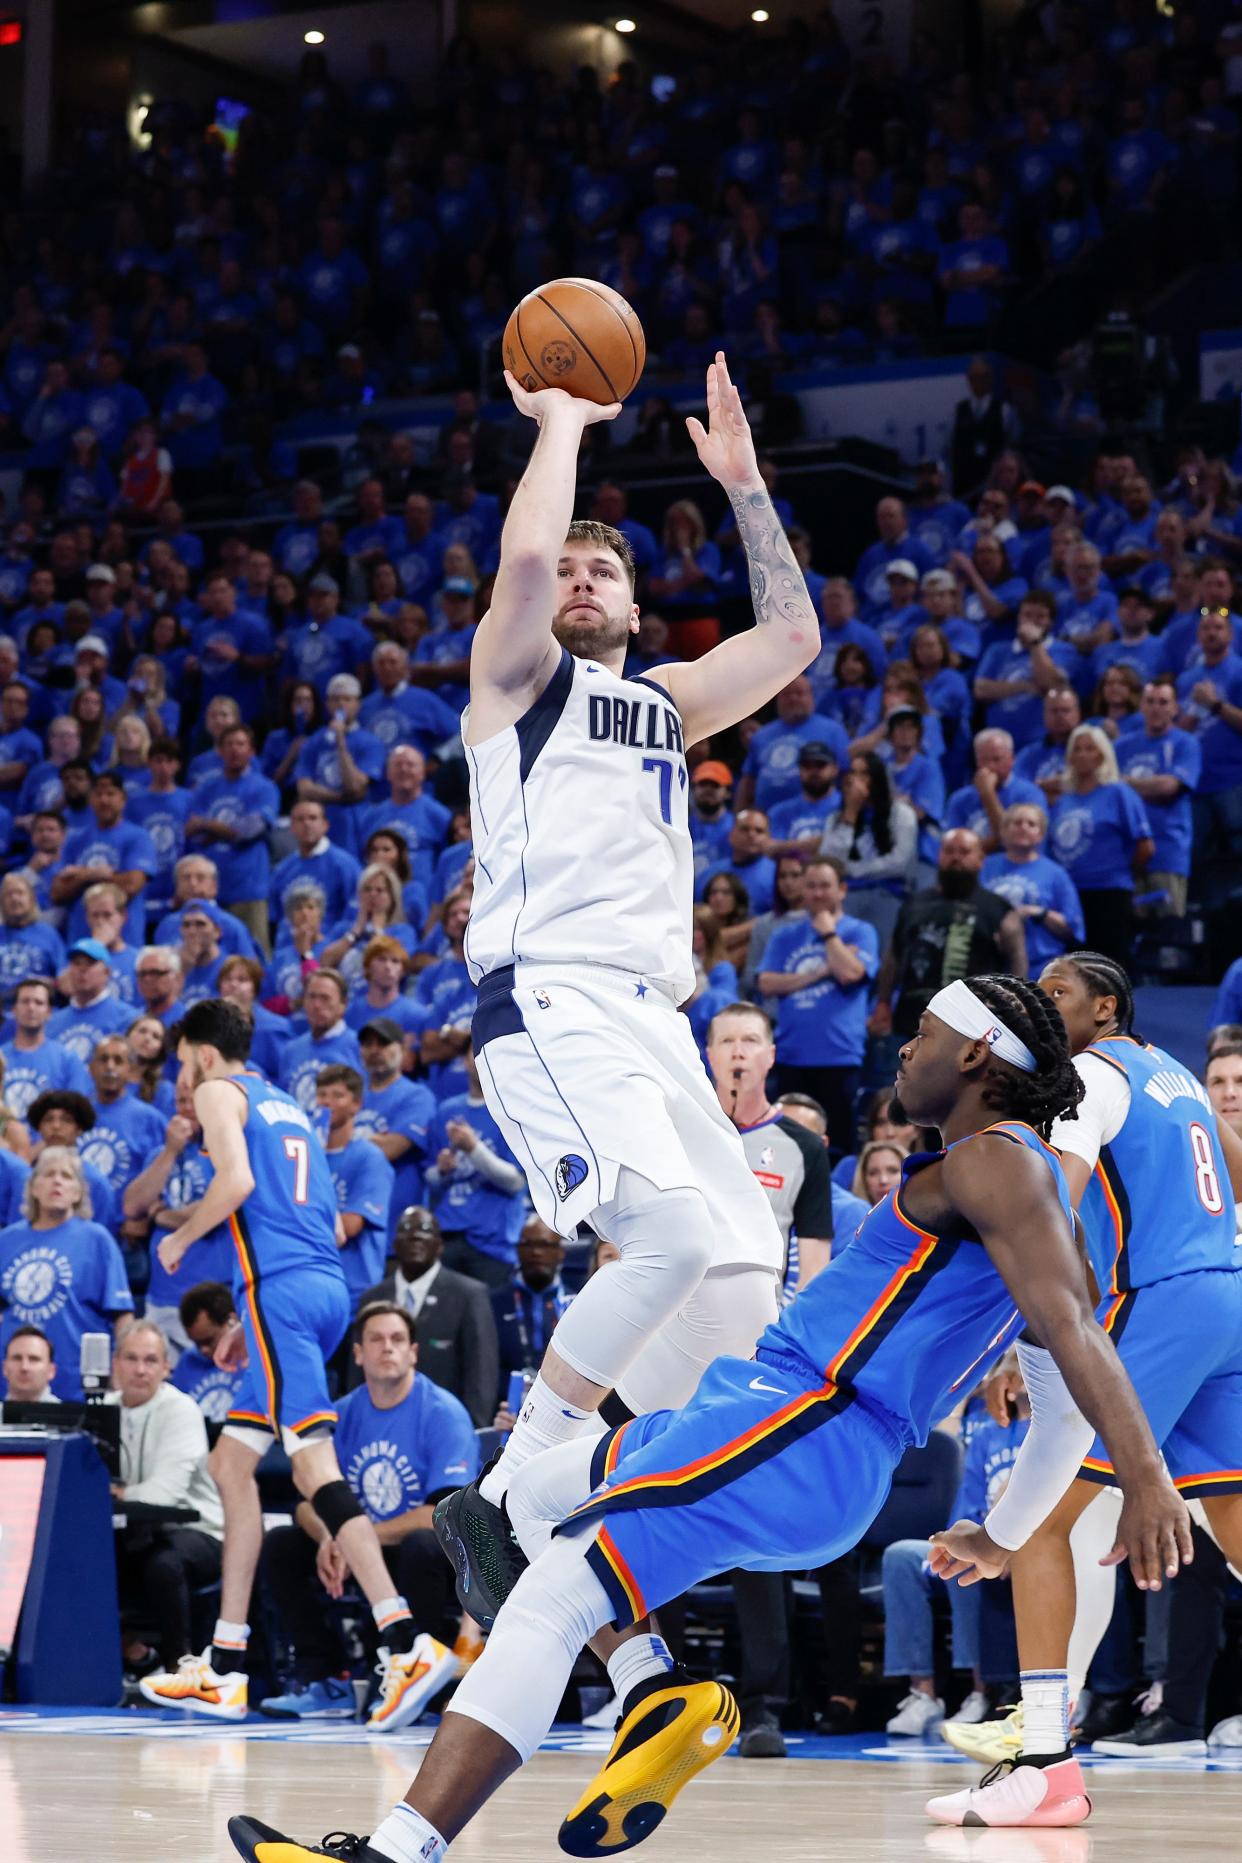 Luka Doncic scored 29 points in the Mavericks' Game 2 win over the Thunder.